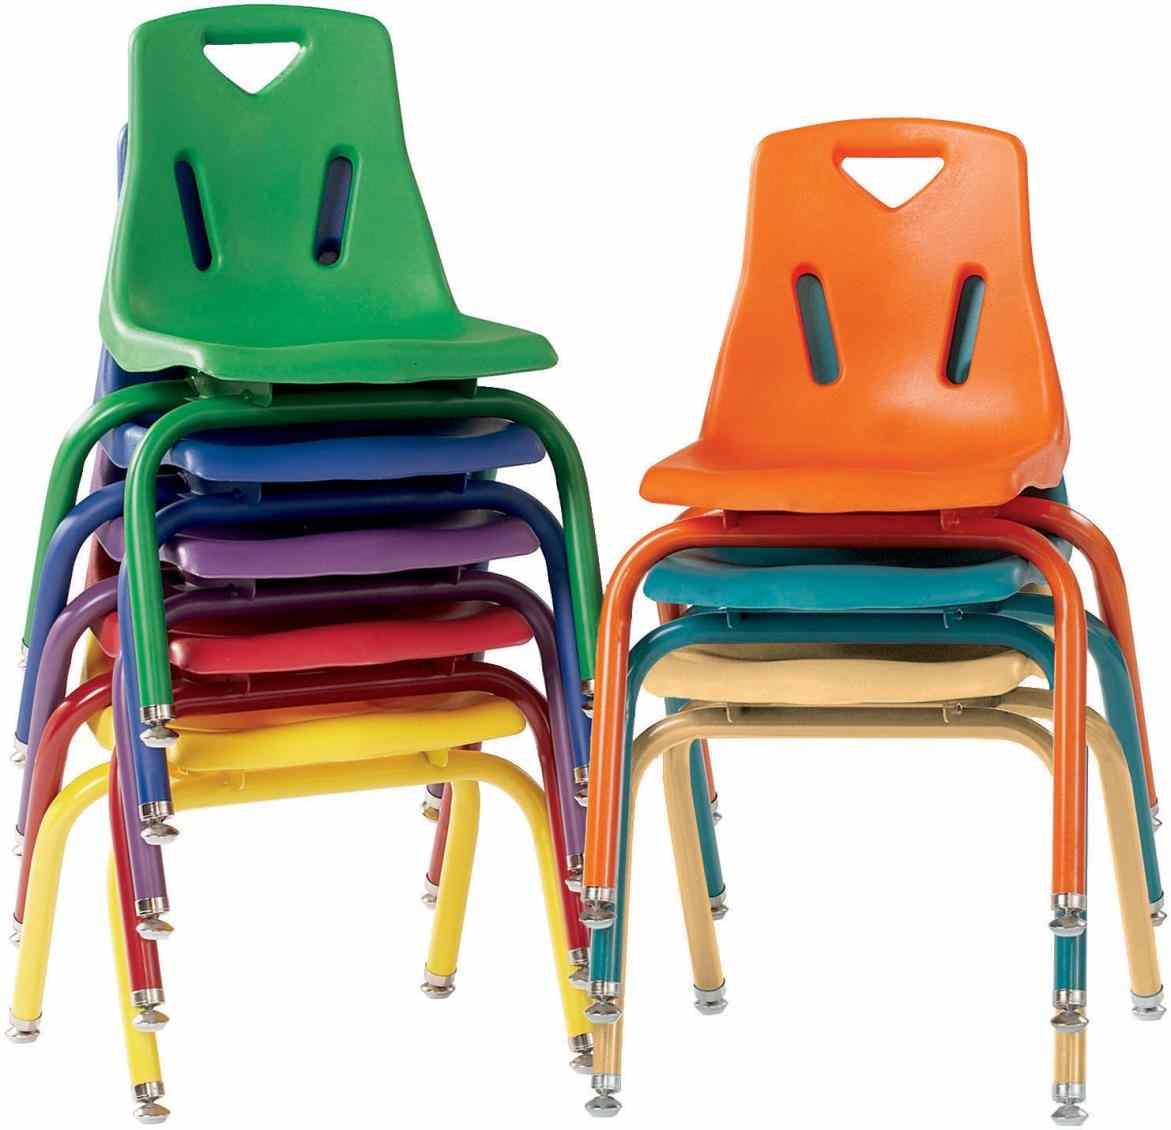 Tristano win black and. Chair clipart chair student